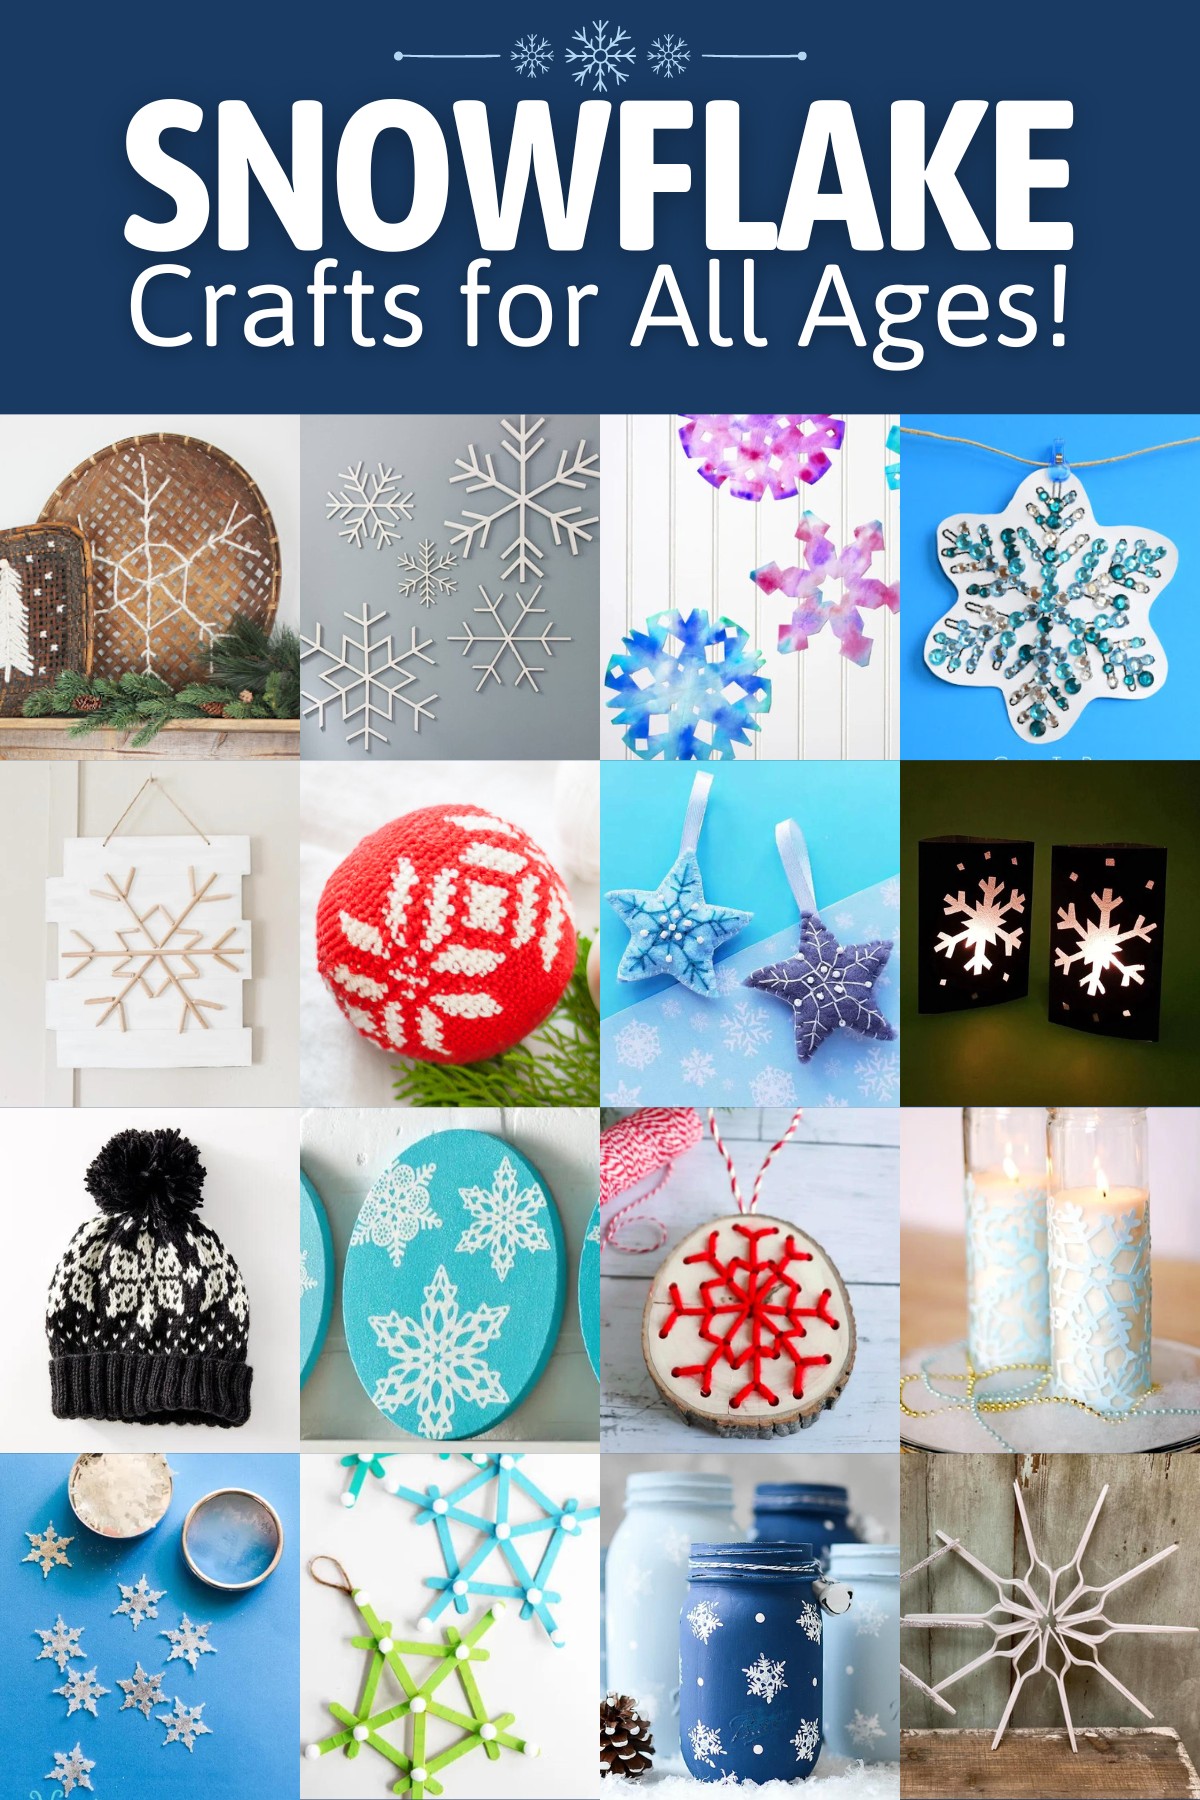 Snowflake Crafts for All Ages